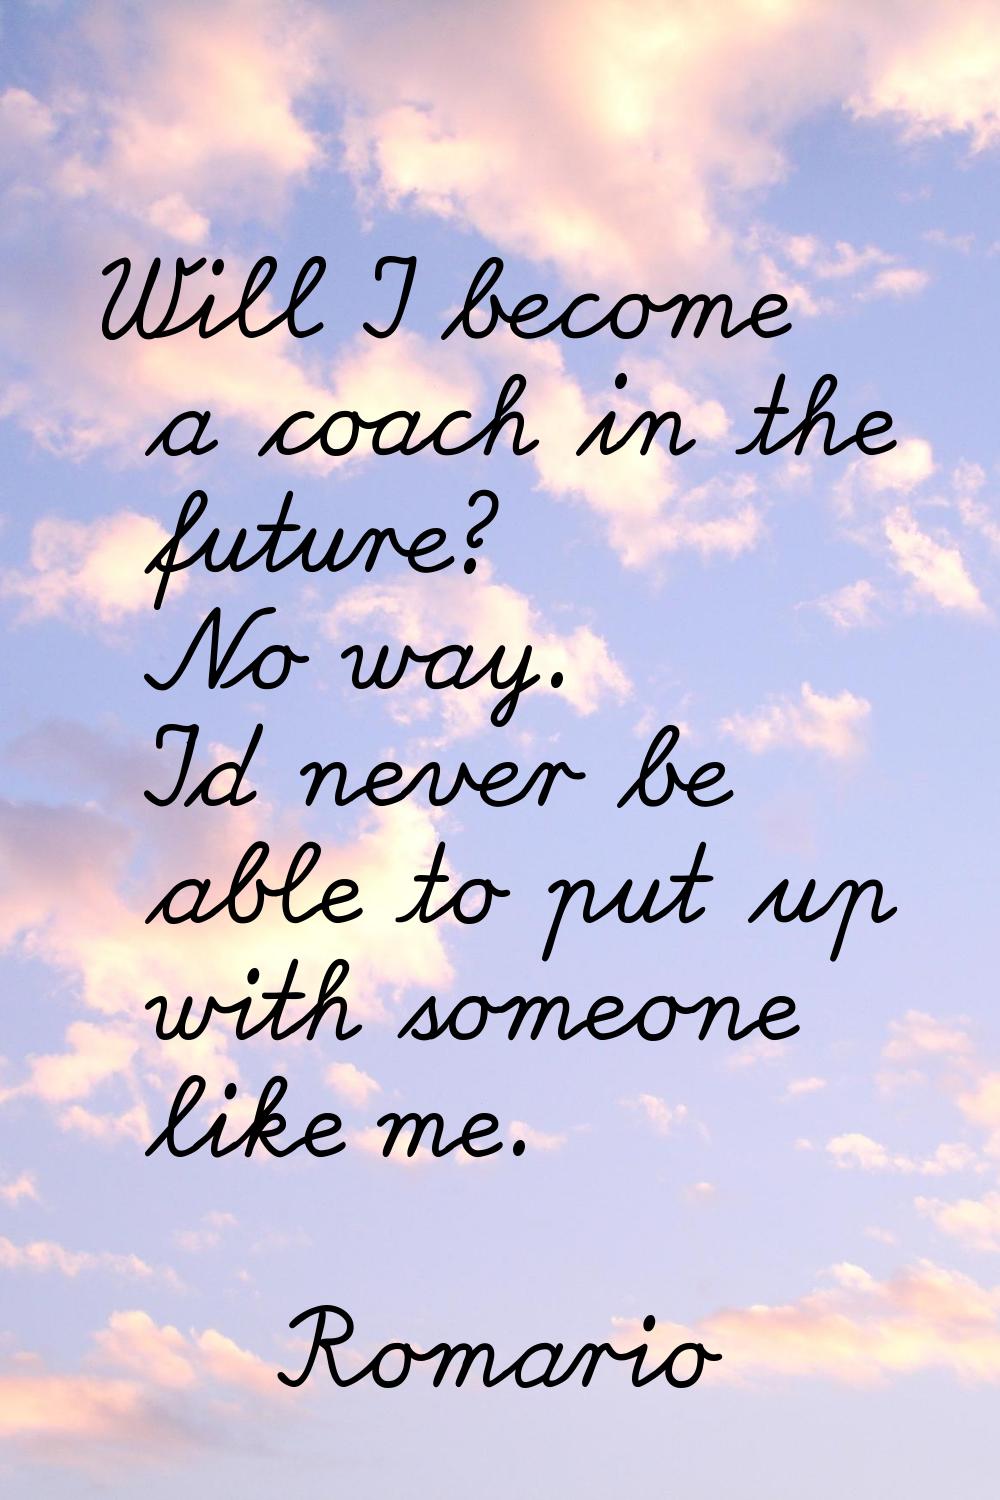 Will I become a coach in the future? No way. I'd never be able to put up with someone like me.